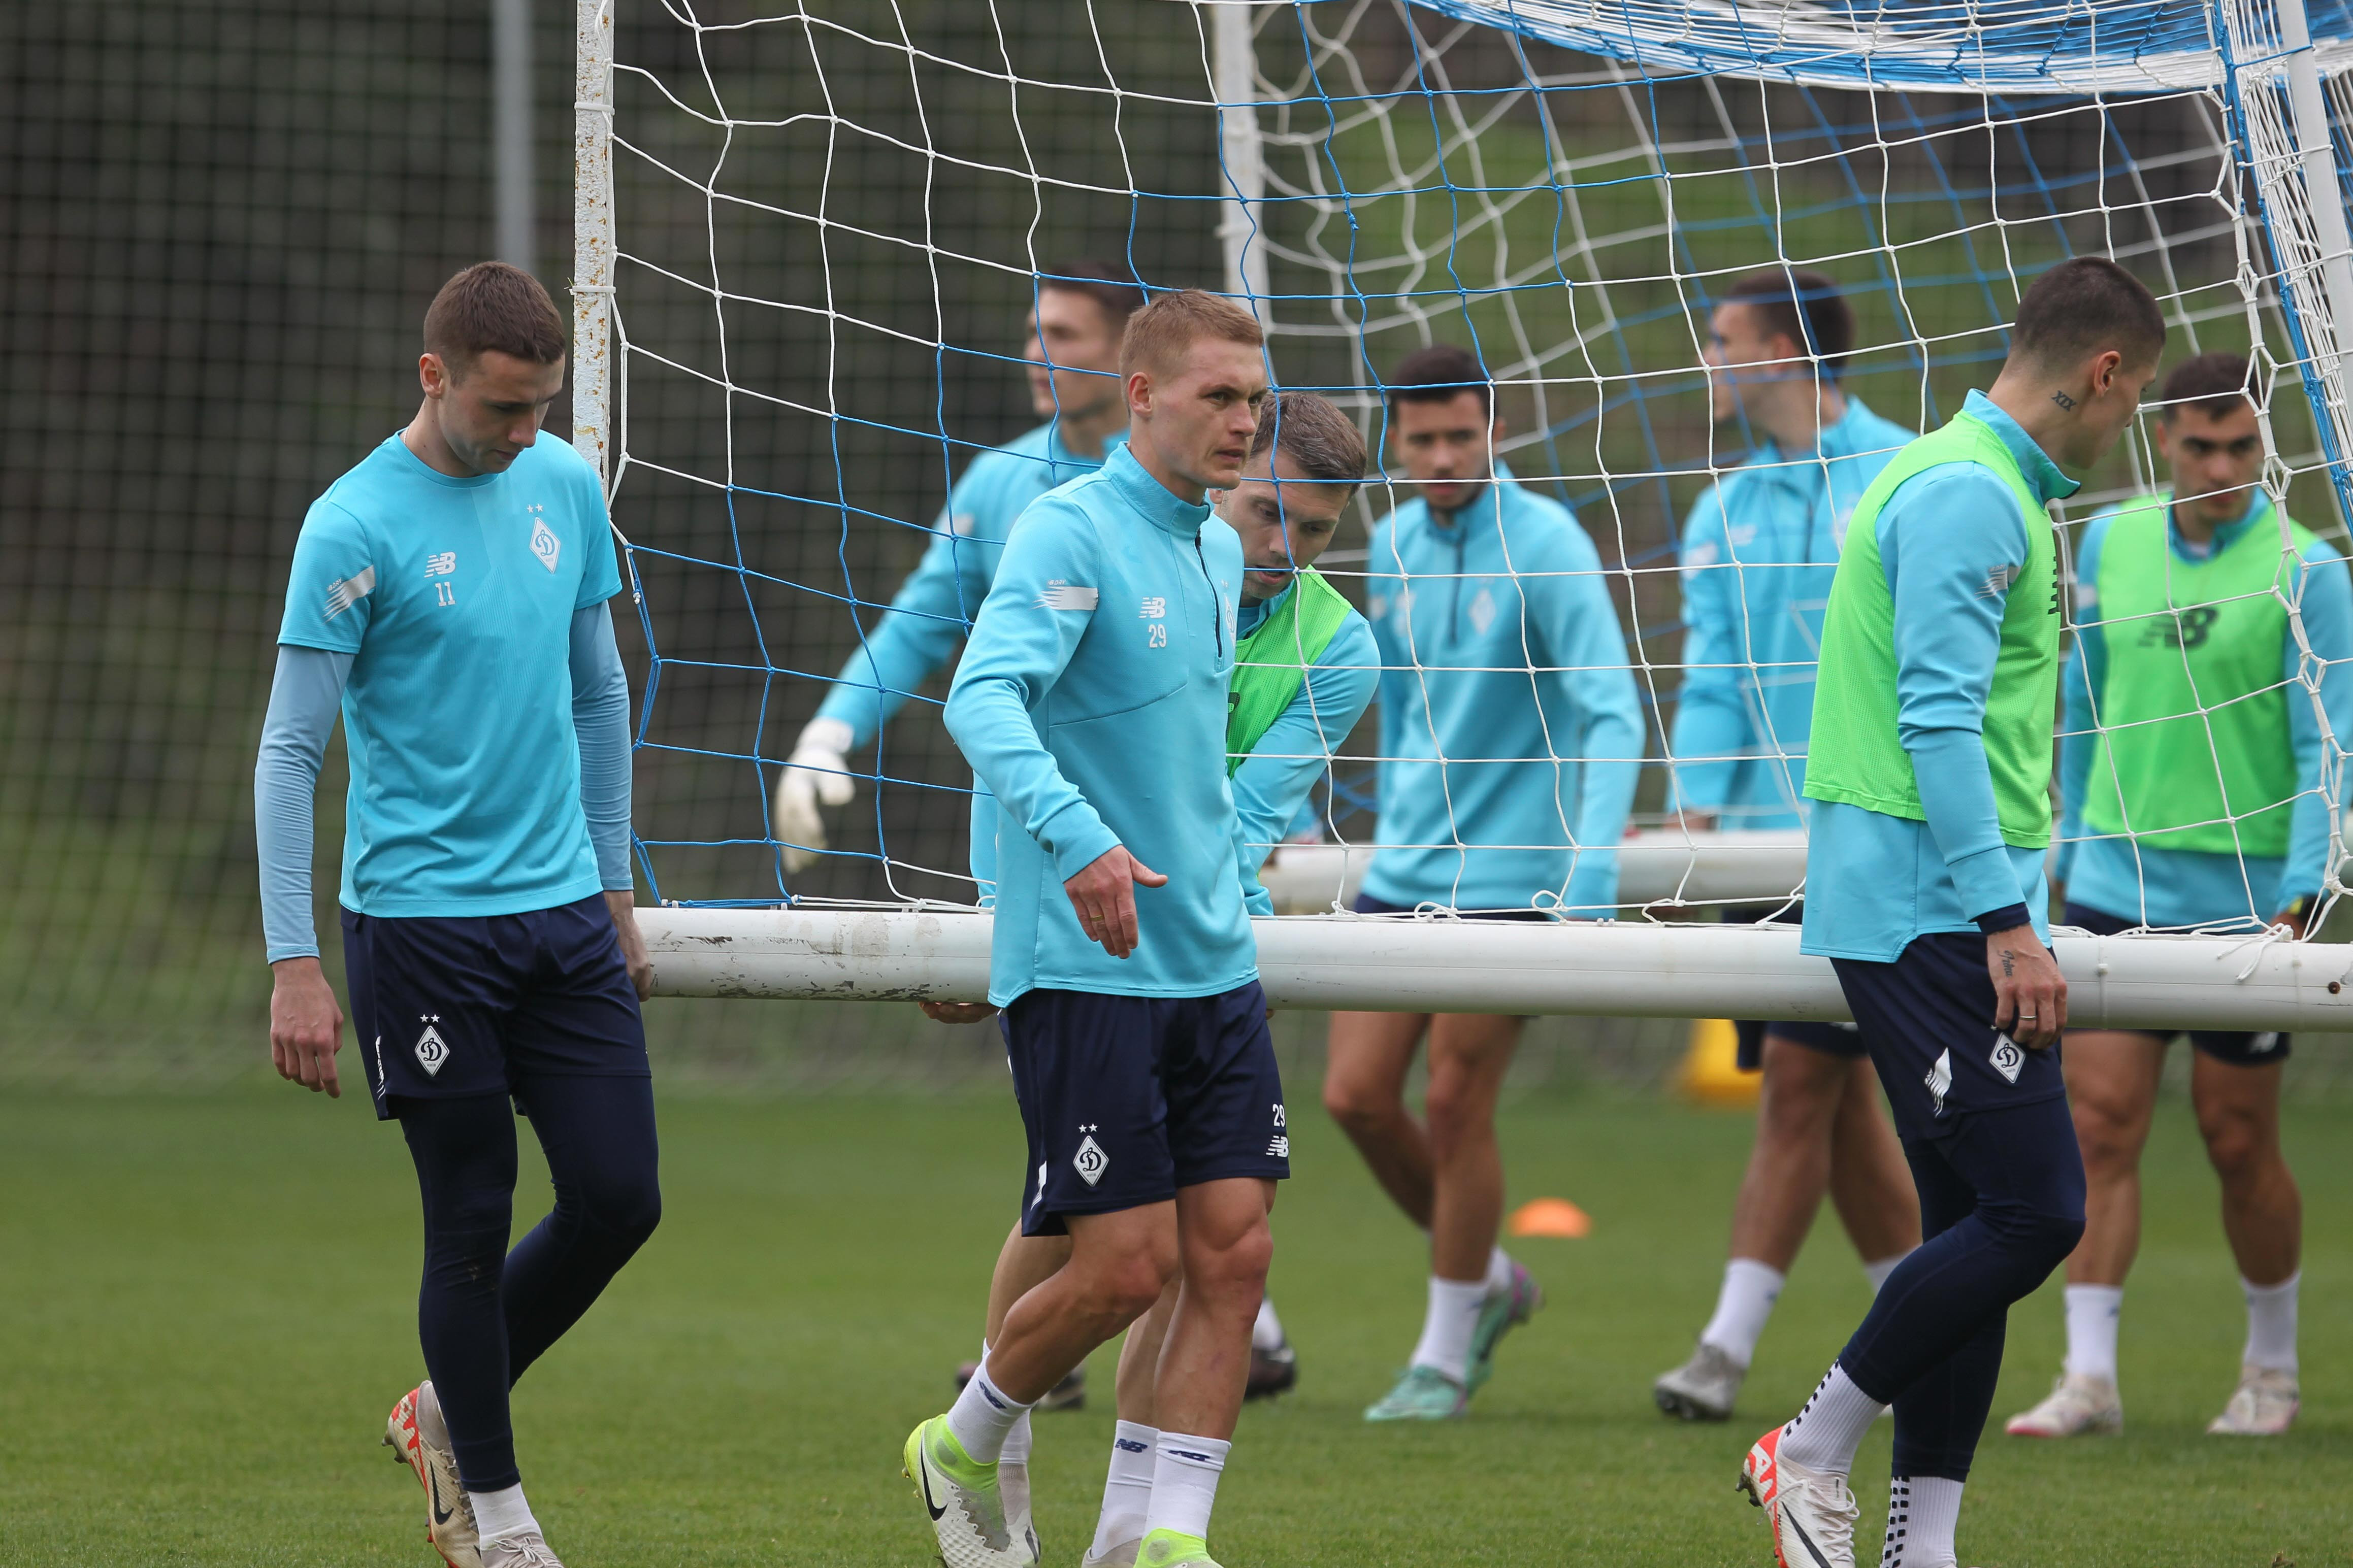 Training camp: day of the match against RFS